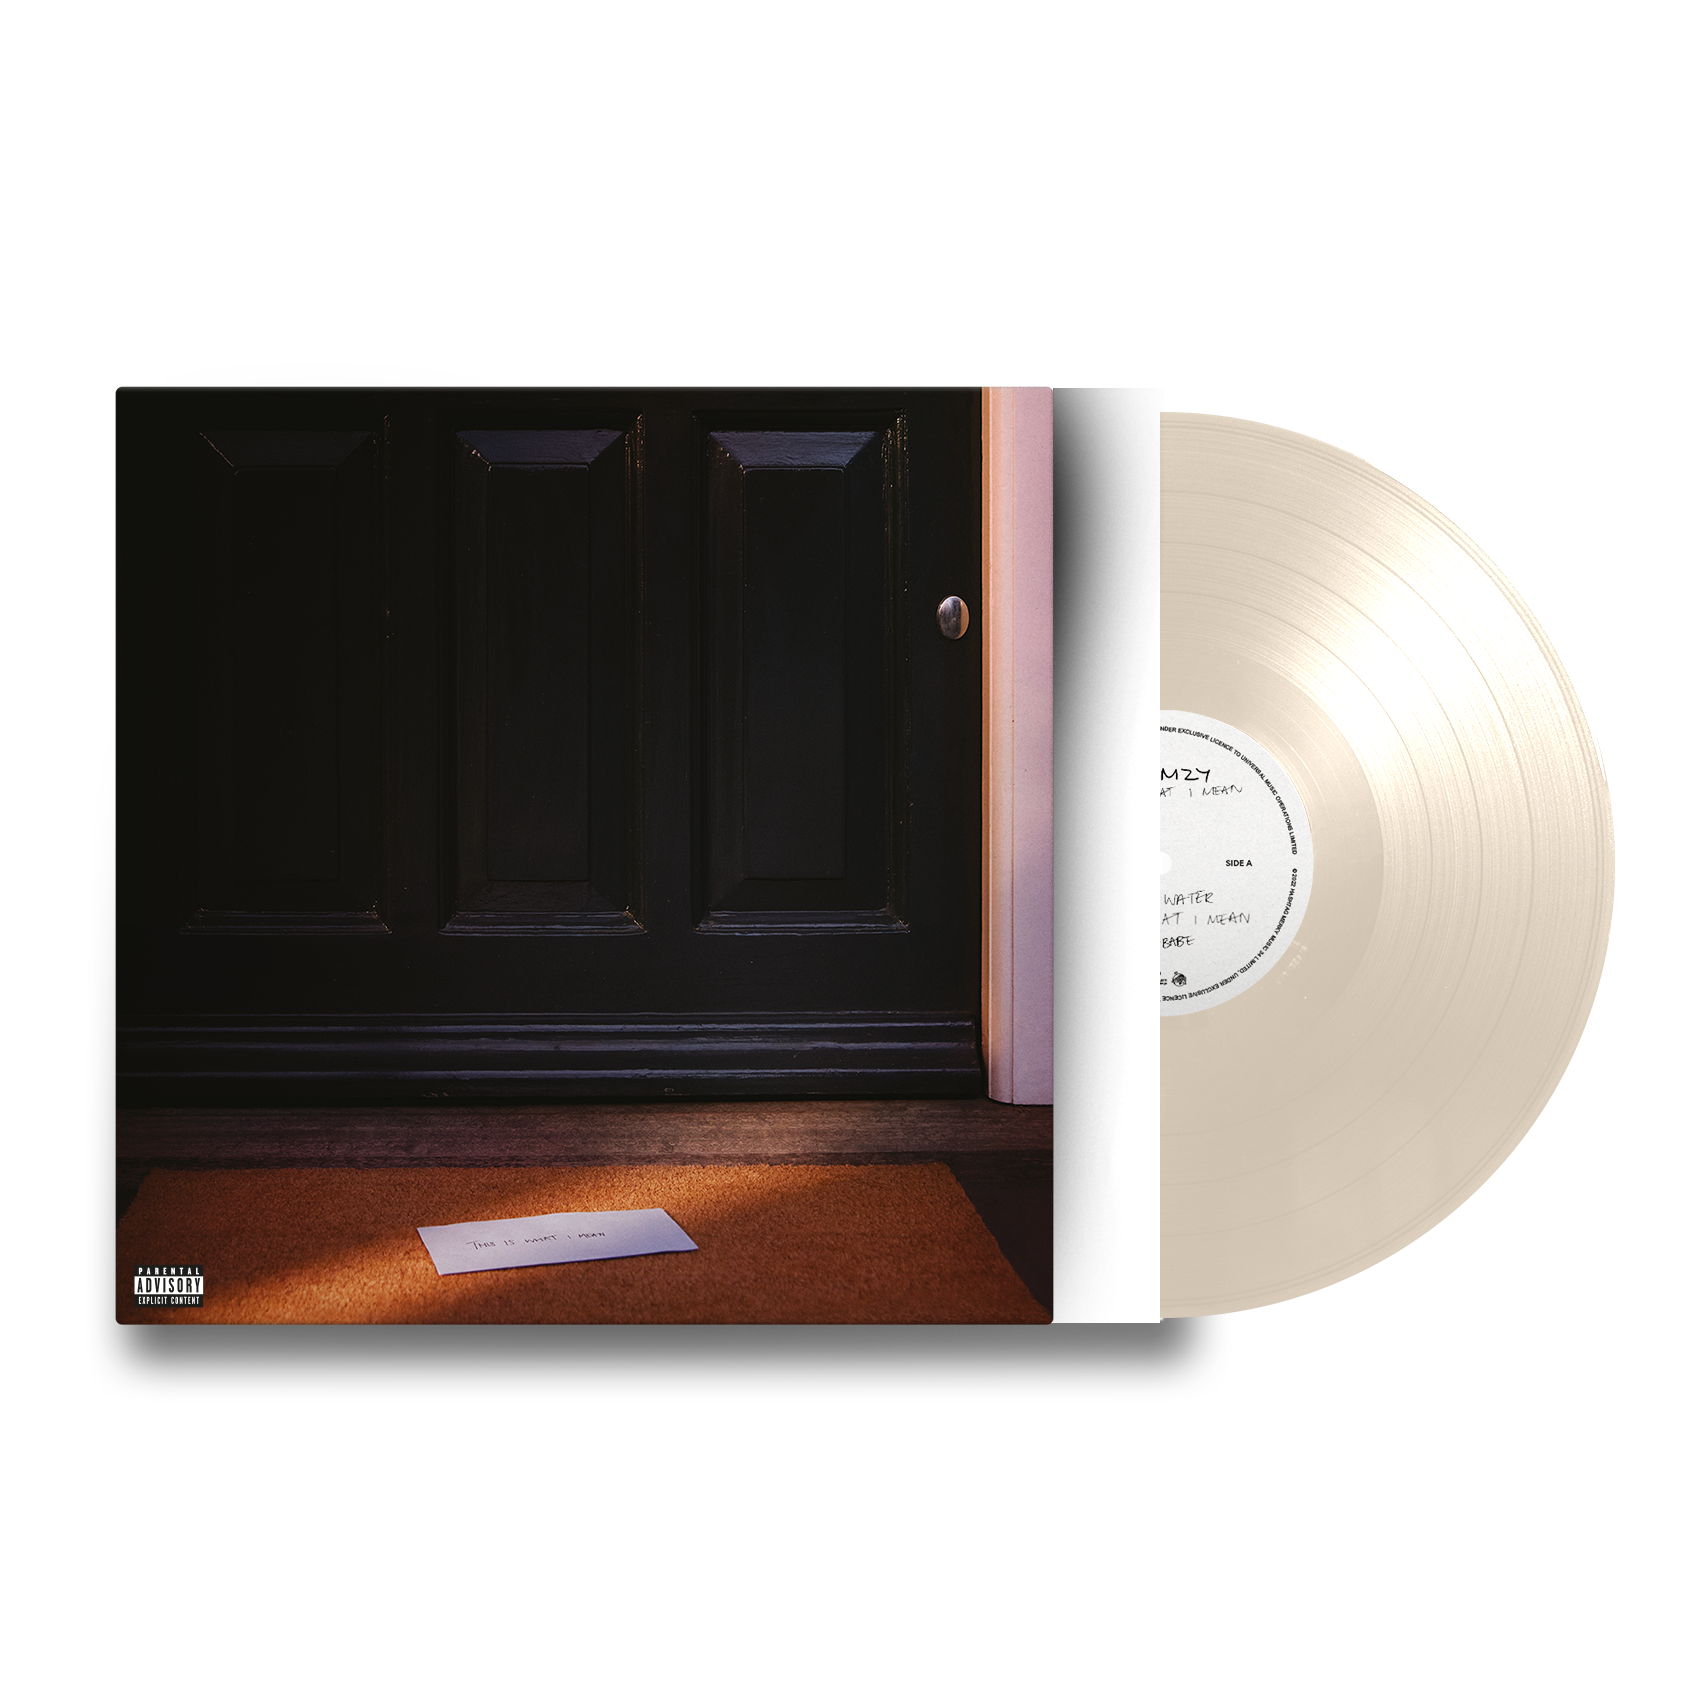 Stormzy - This Is What I Mean: Limited Cream Vinyl 2LP